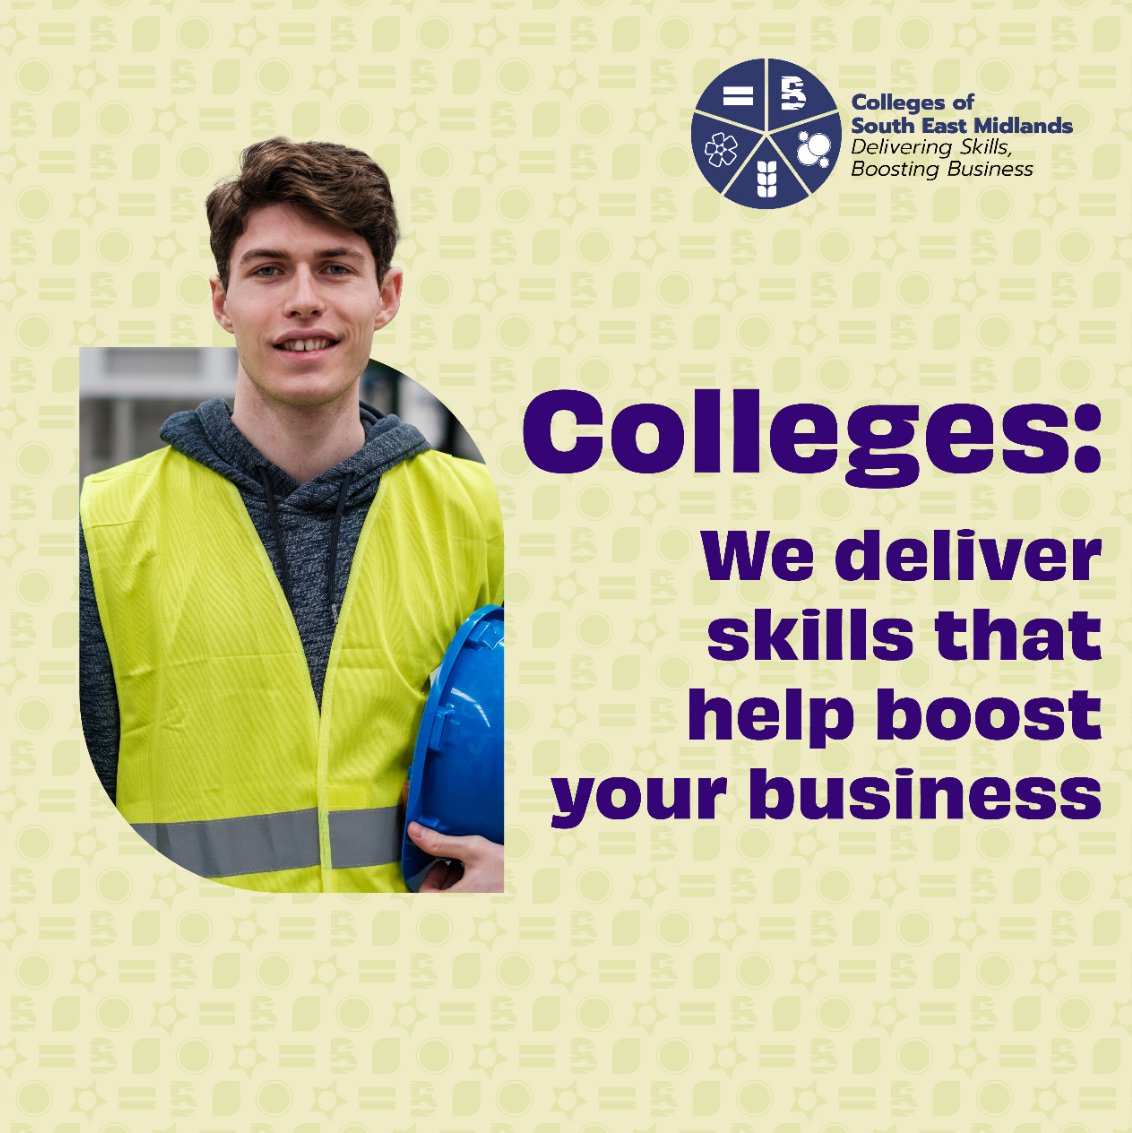 Partnering with a local college can help your business nurture existing talent and tap into the future talent pipeline.👏 Find out more about how to get involved by visiting deliveringskills.co.uk #deliveringskills #boostingbusiness #businesses #employers @deliveringskills